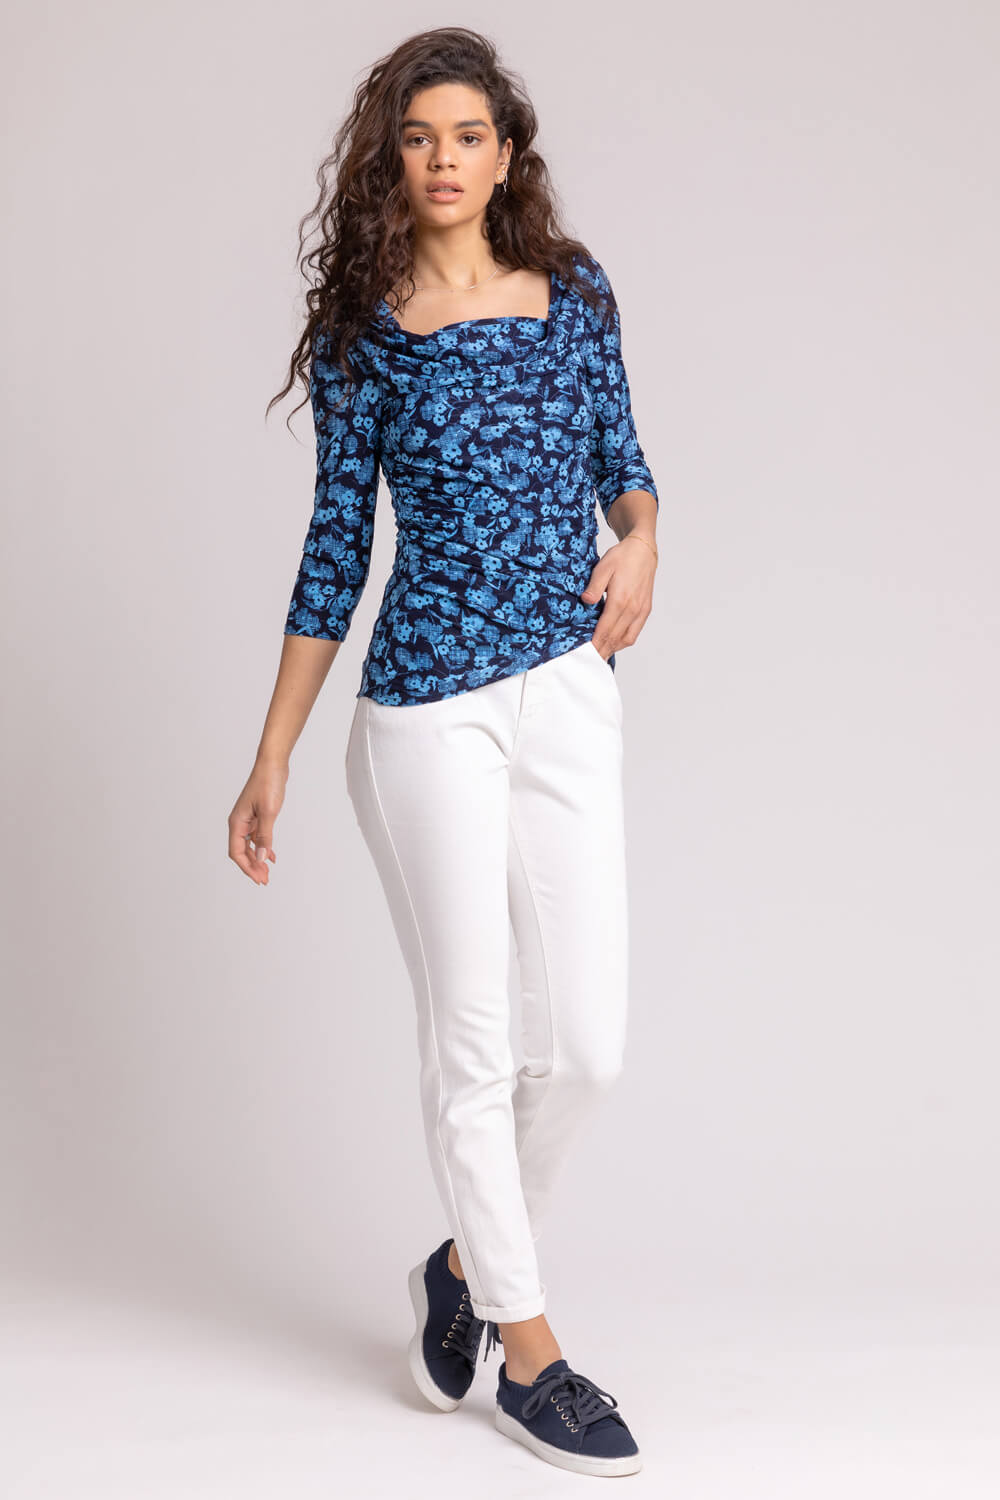 Blue Floral Print Cowl Neck Top, Image 3 of 4